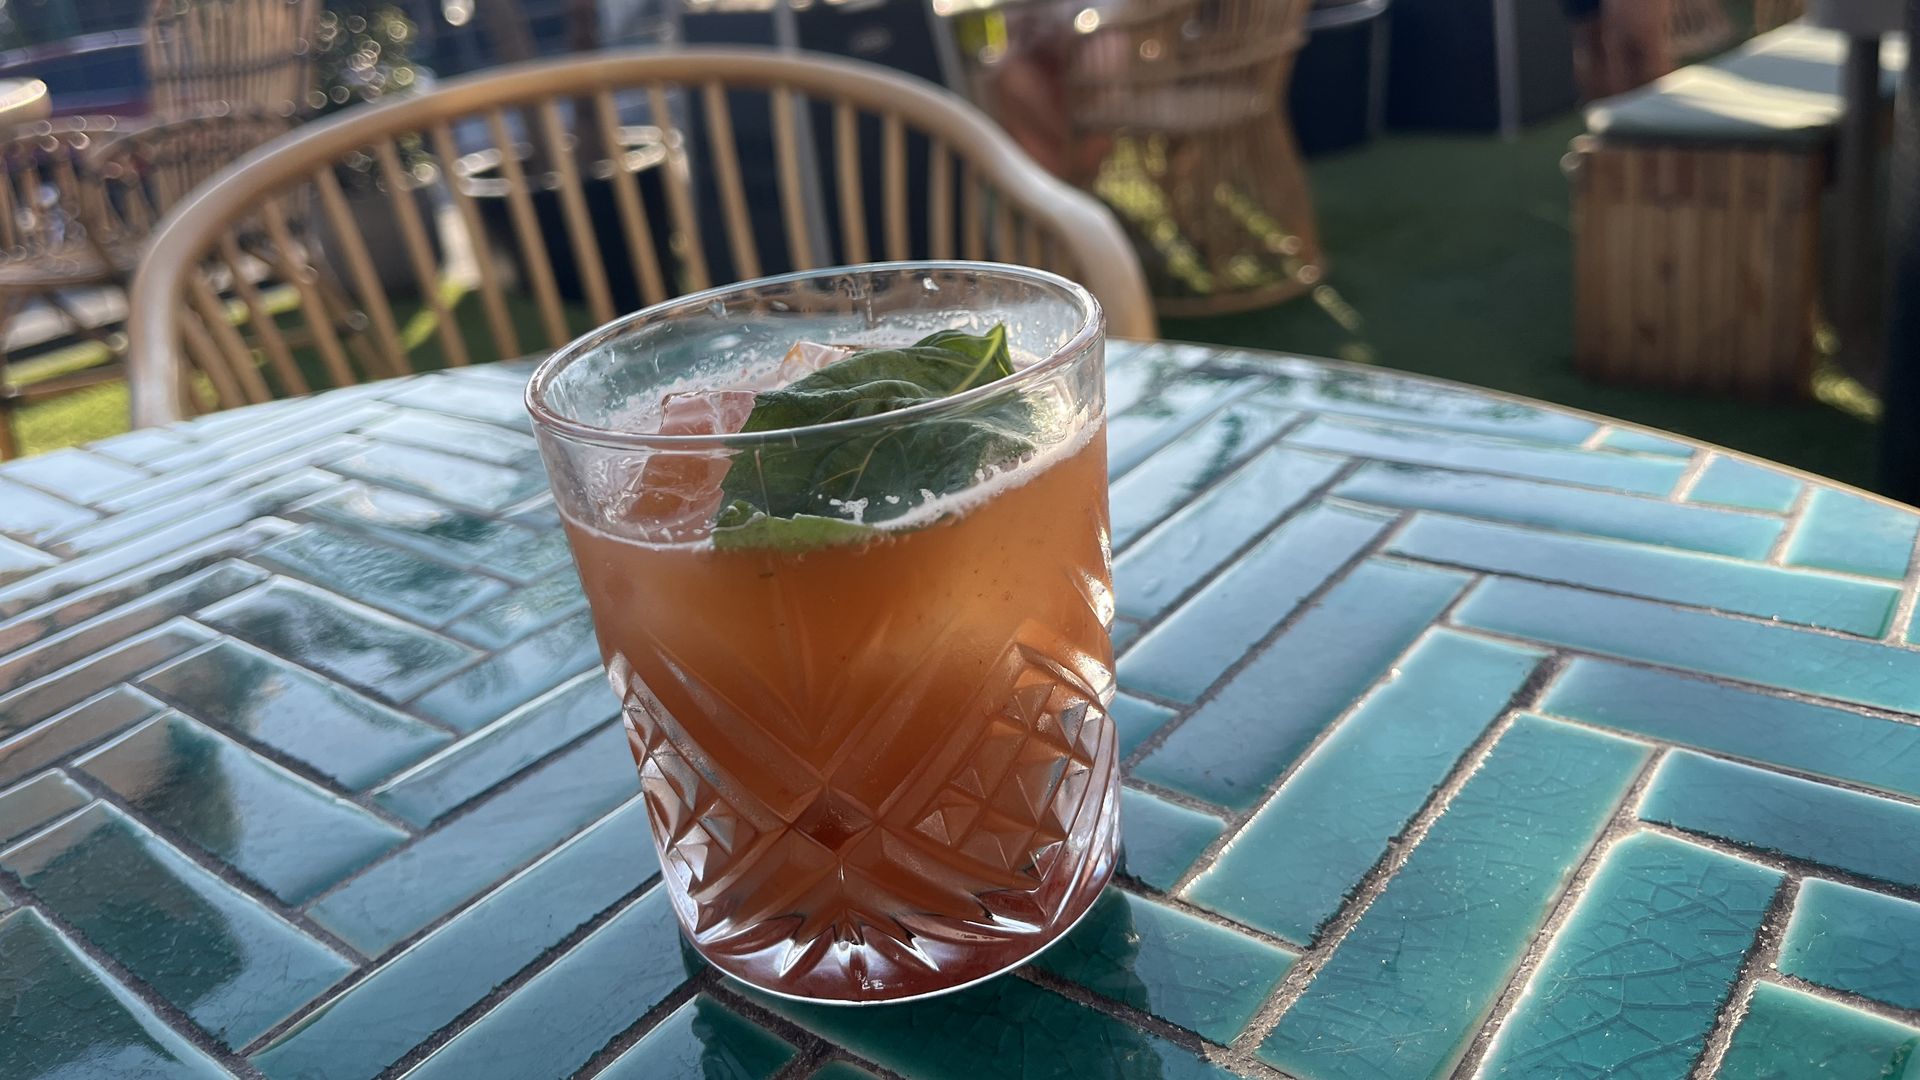 A cocktail glass filled with an orange liquid topped with a basil leaf sits on a teal tiled table on an outdoor patio.